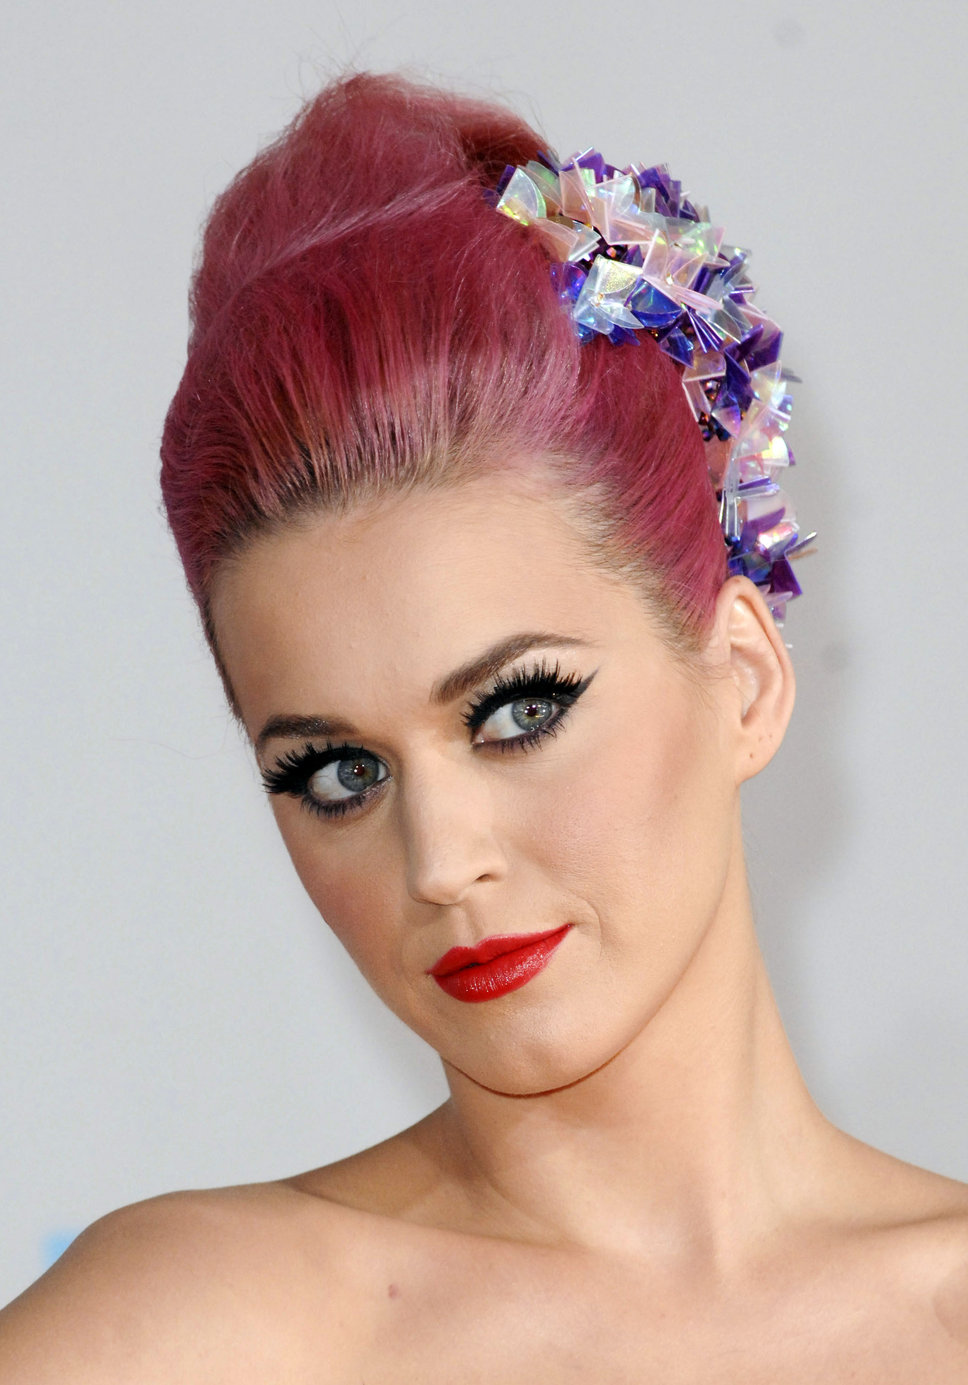 katy-perry-pink-hair-updo - My New Hair